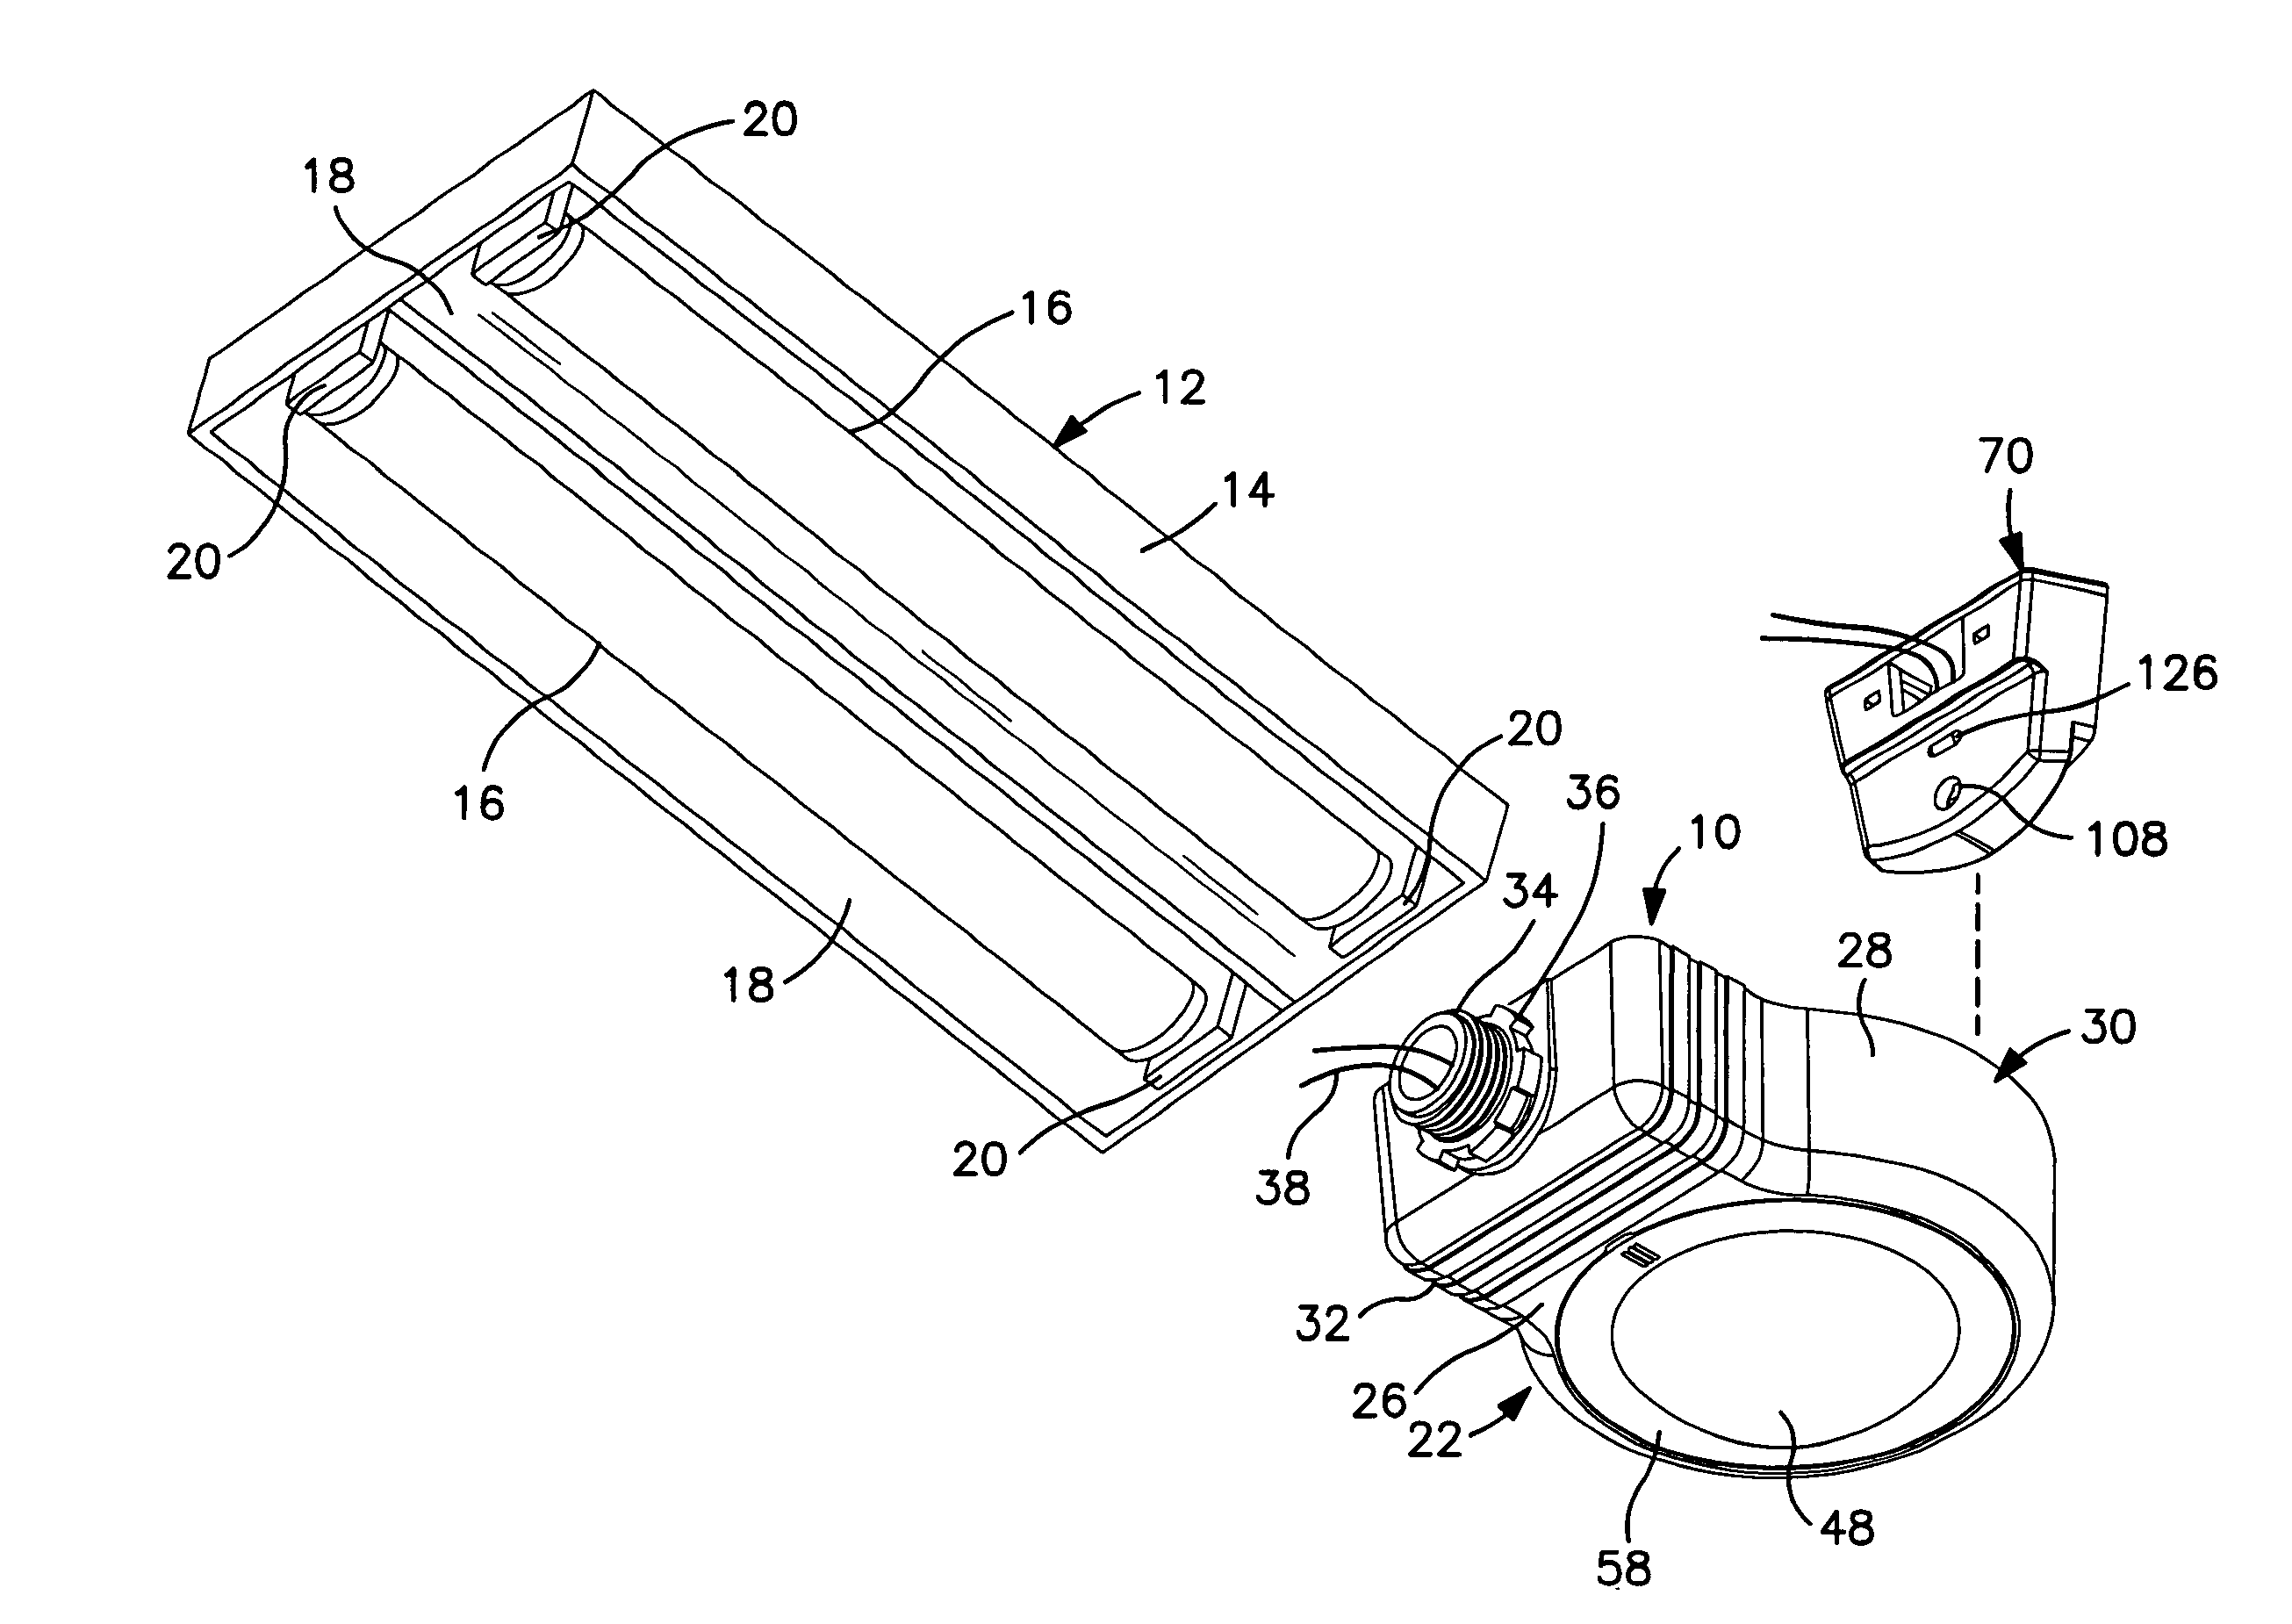 Occupancy sensor and override unit for photosensor-based control of load